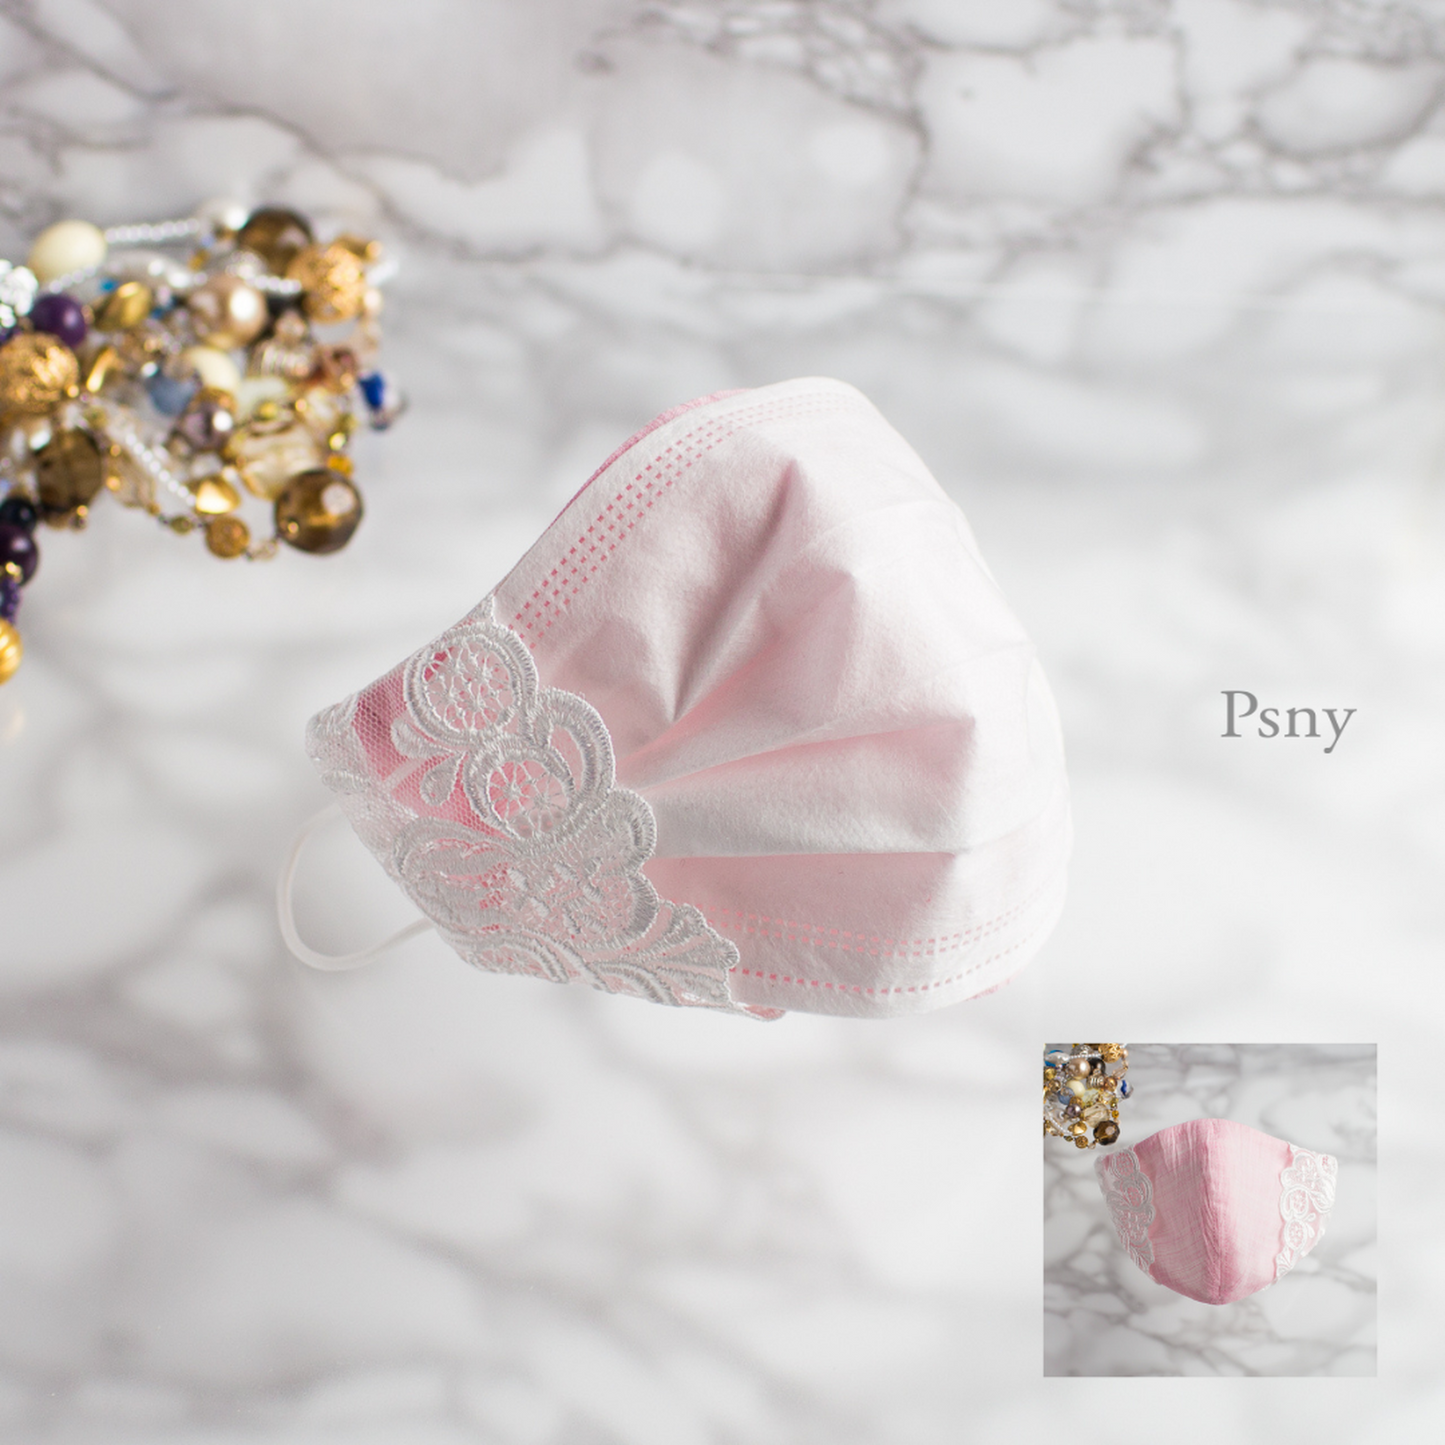 PSNY 2way・White・Lace&amp;Pink・Linen Mask Cover 無紡布面膜好看 7 3D Mask Skin/Silk selective Stringed mask cover 3D Elegant Ceremonial Occasion Two-Way 2W07